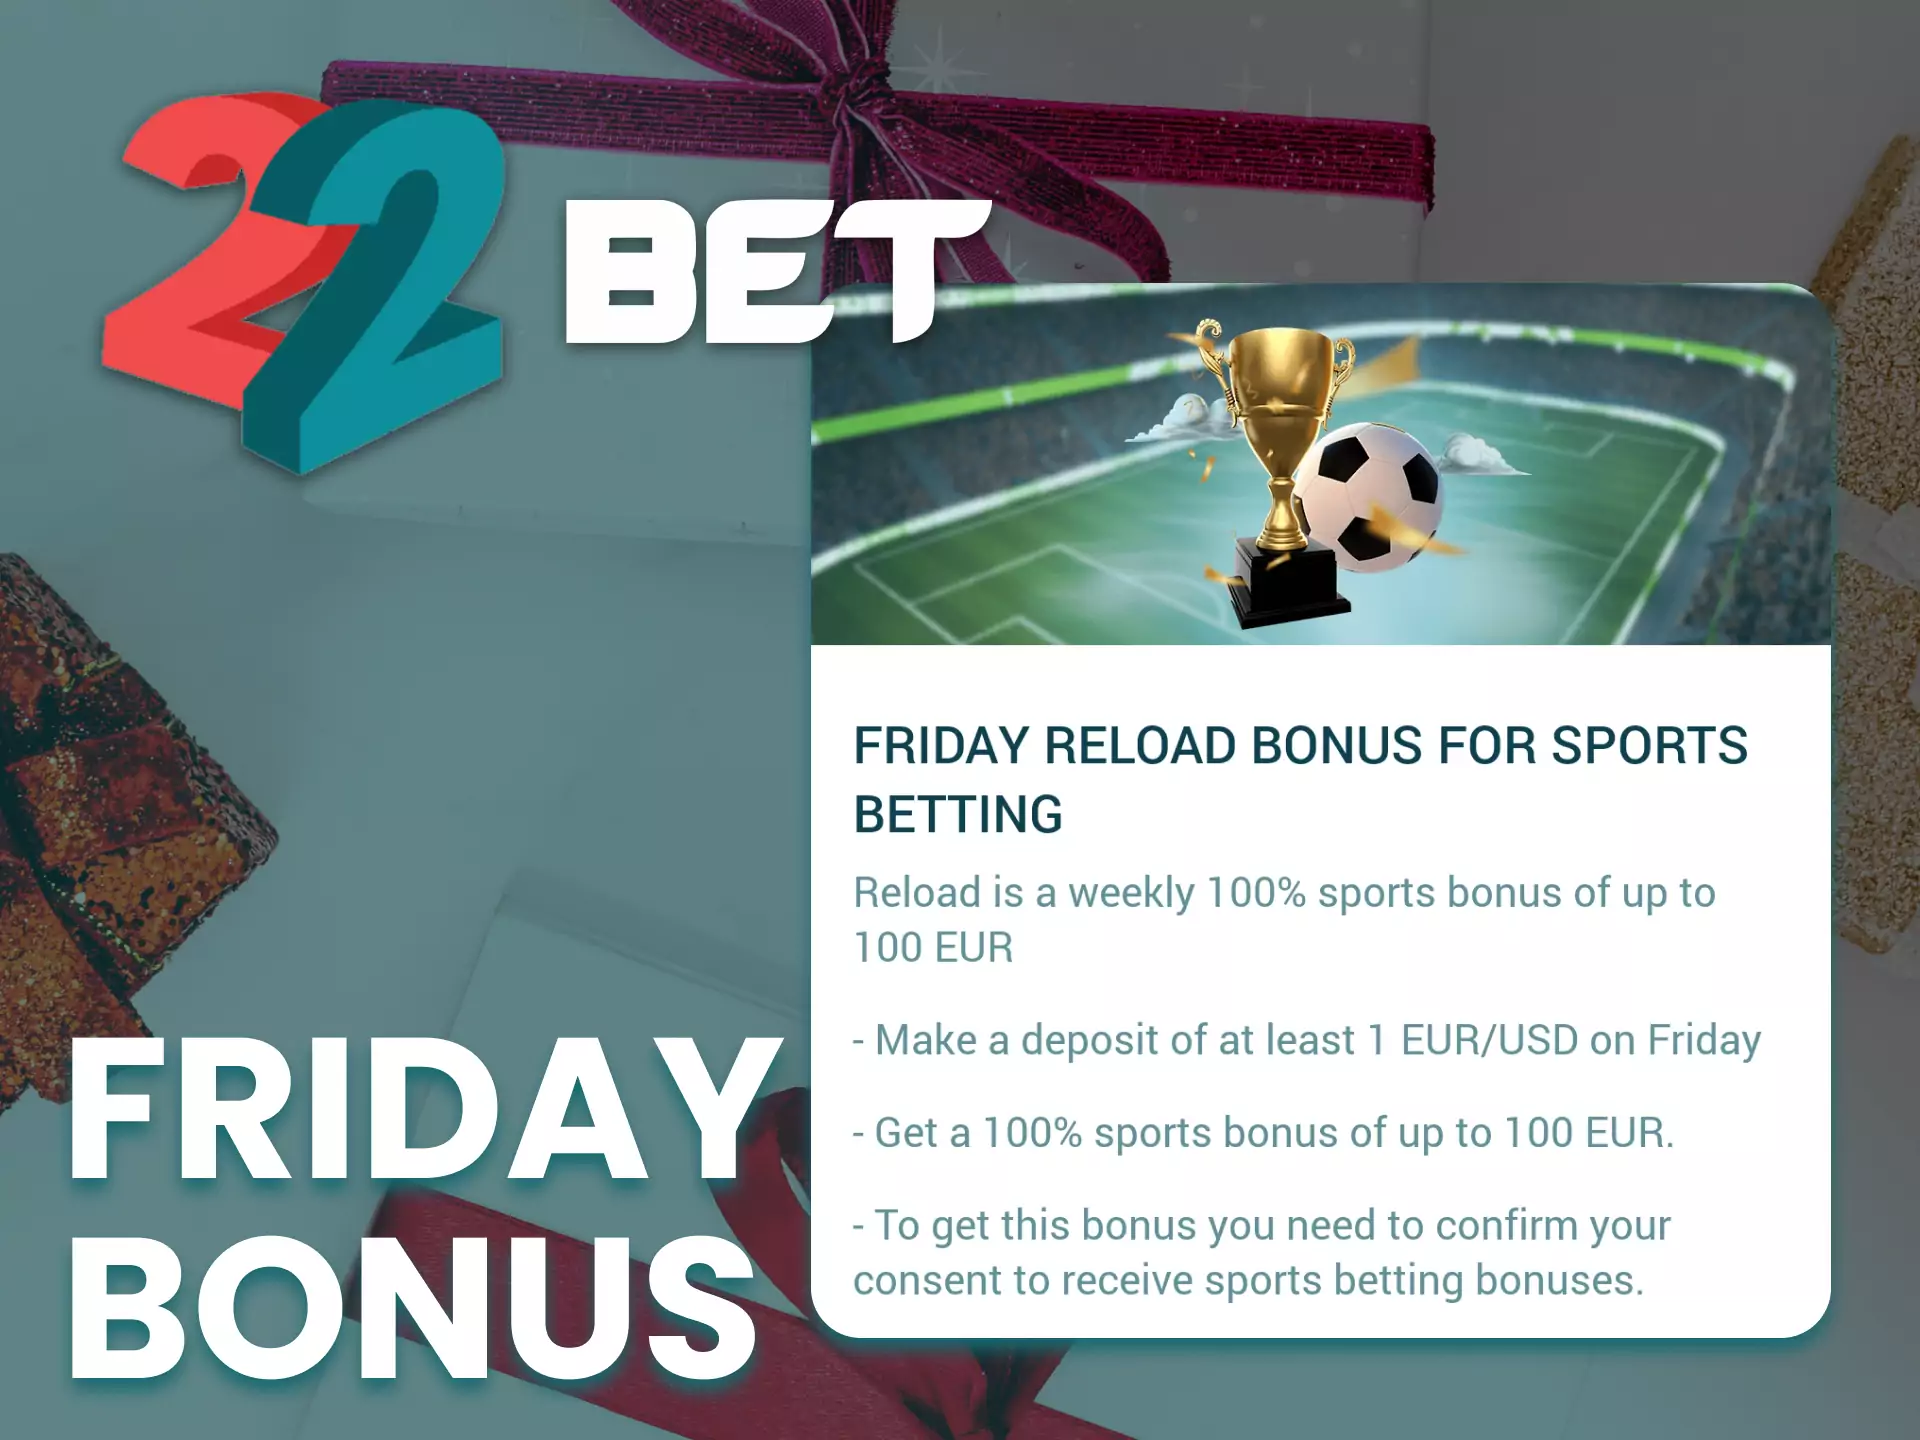 In the 22bet app every Friday get a special bonus.